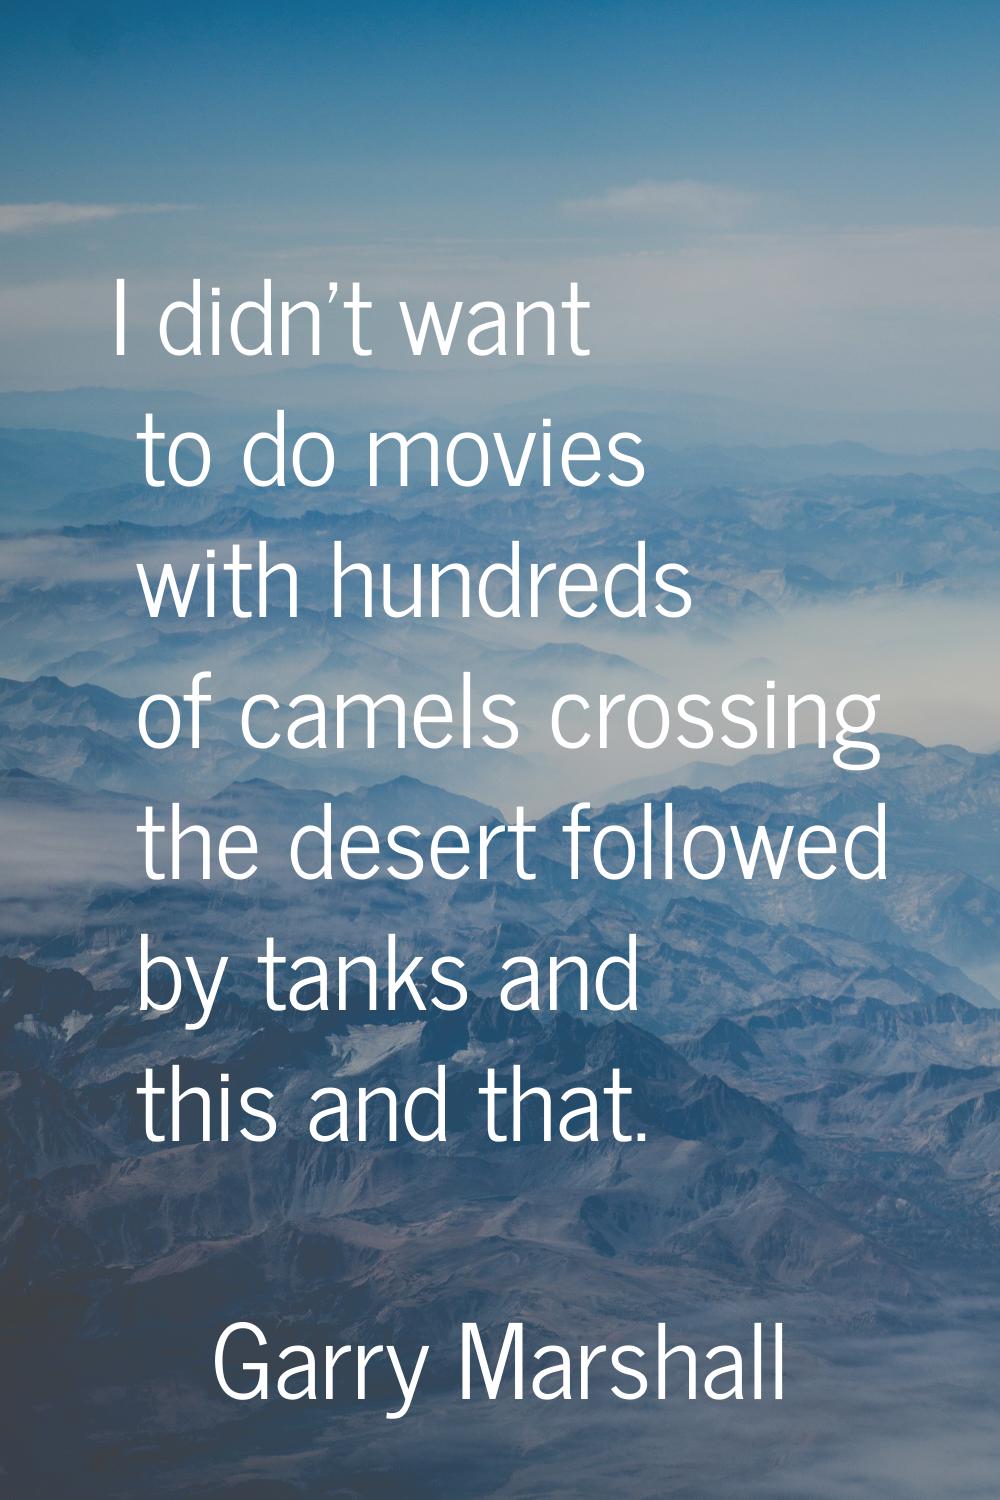 I didn't want to do movies with hundreds of camels crossing the desert followed by tanks and this a